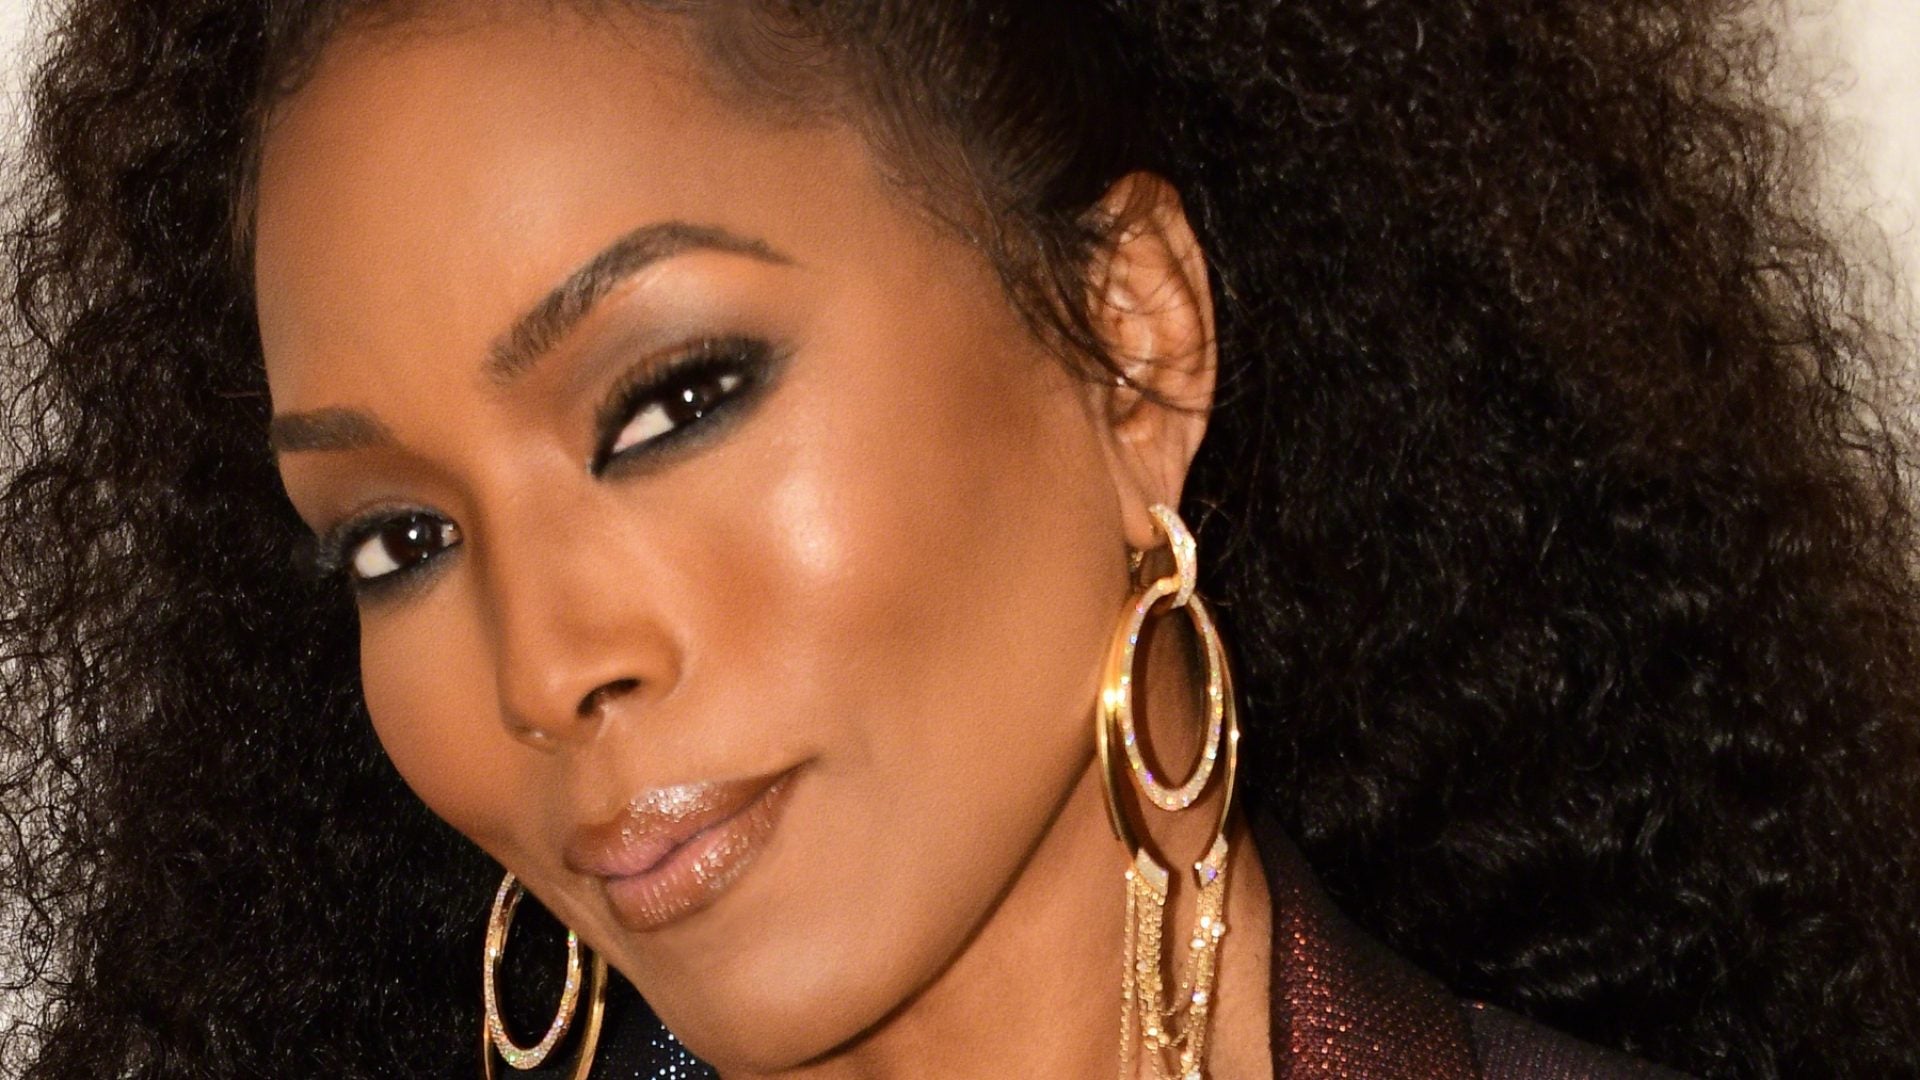 Angela Bassett On Clean Eating, Cooking For Her Family And Those "Ageless" Compliments